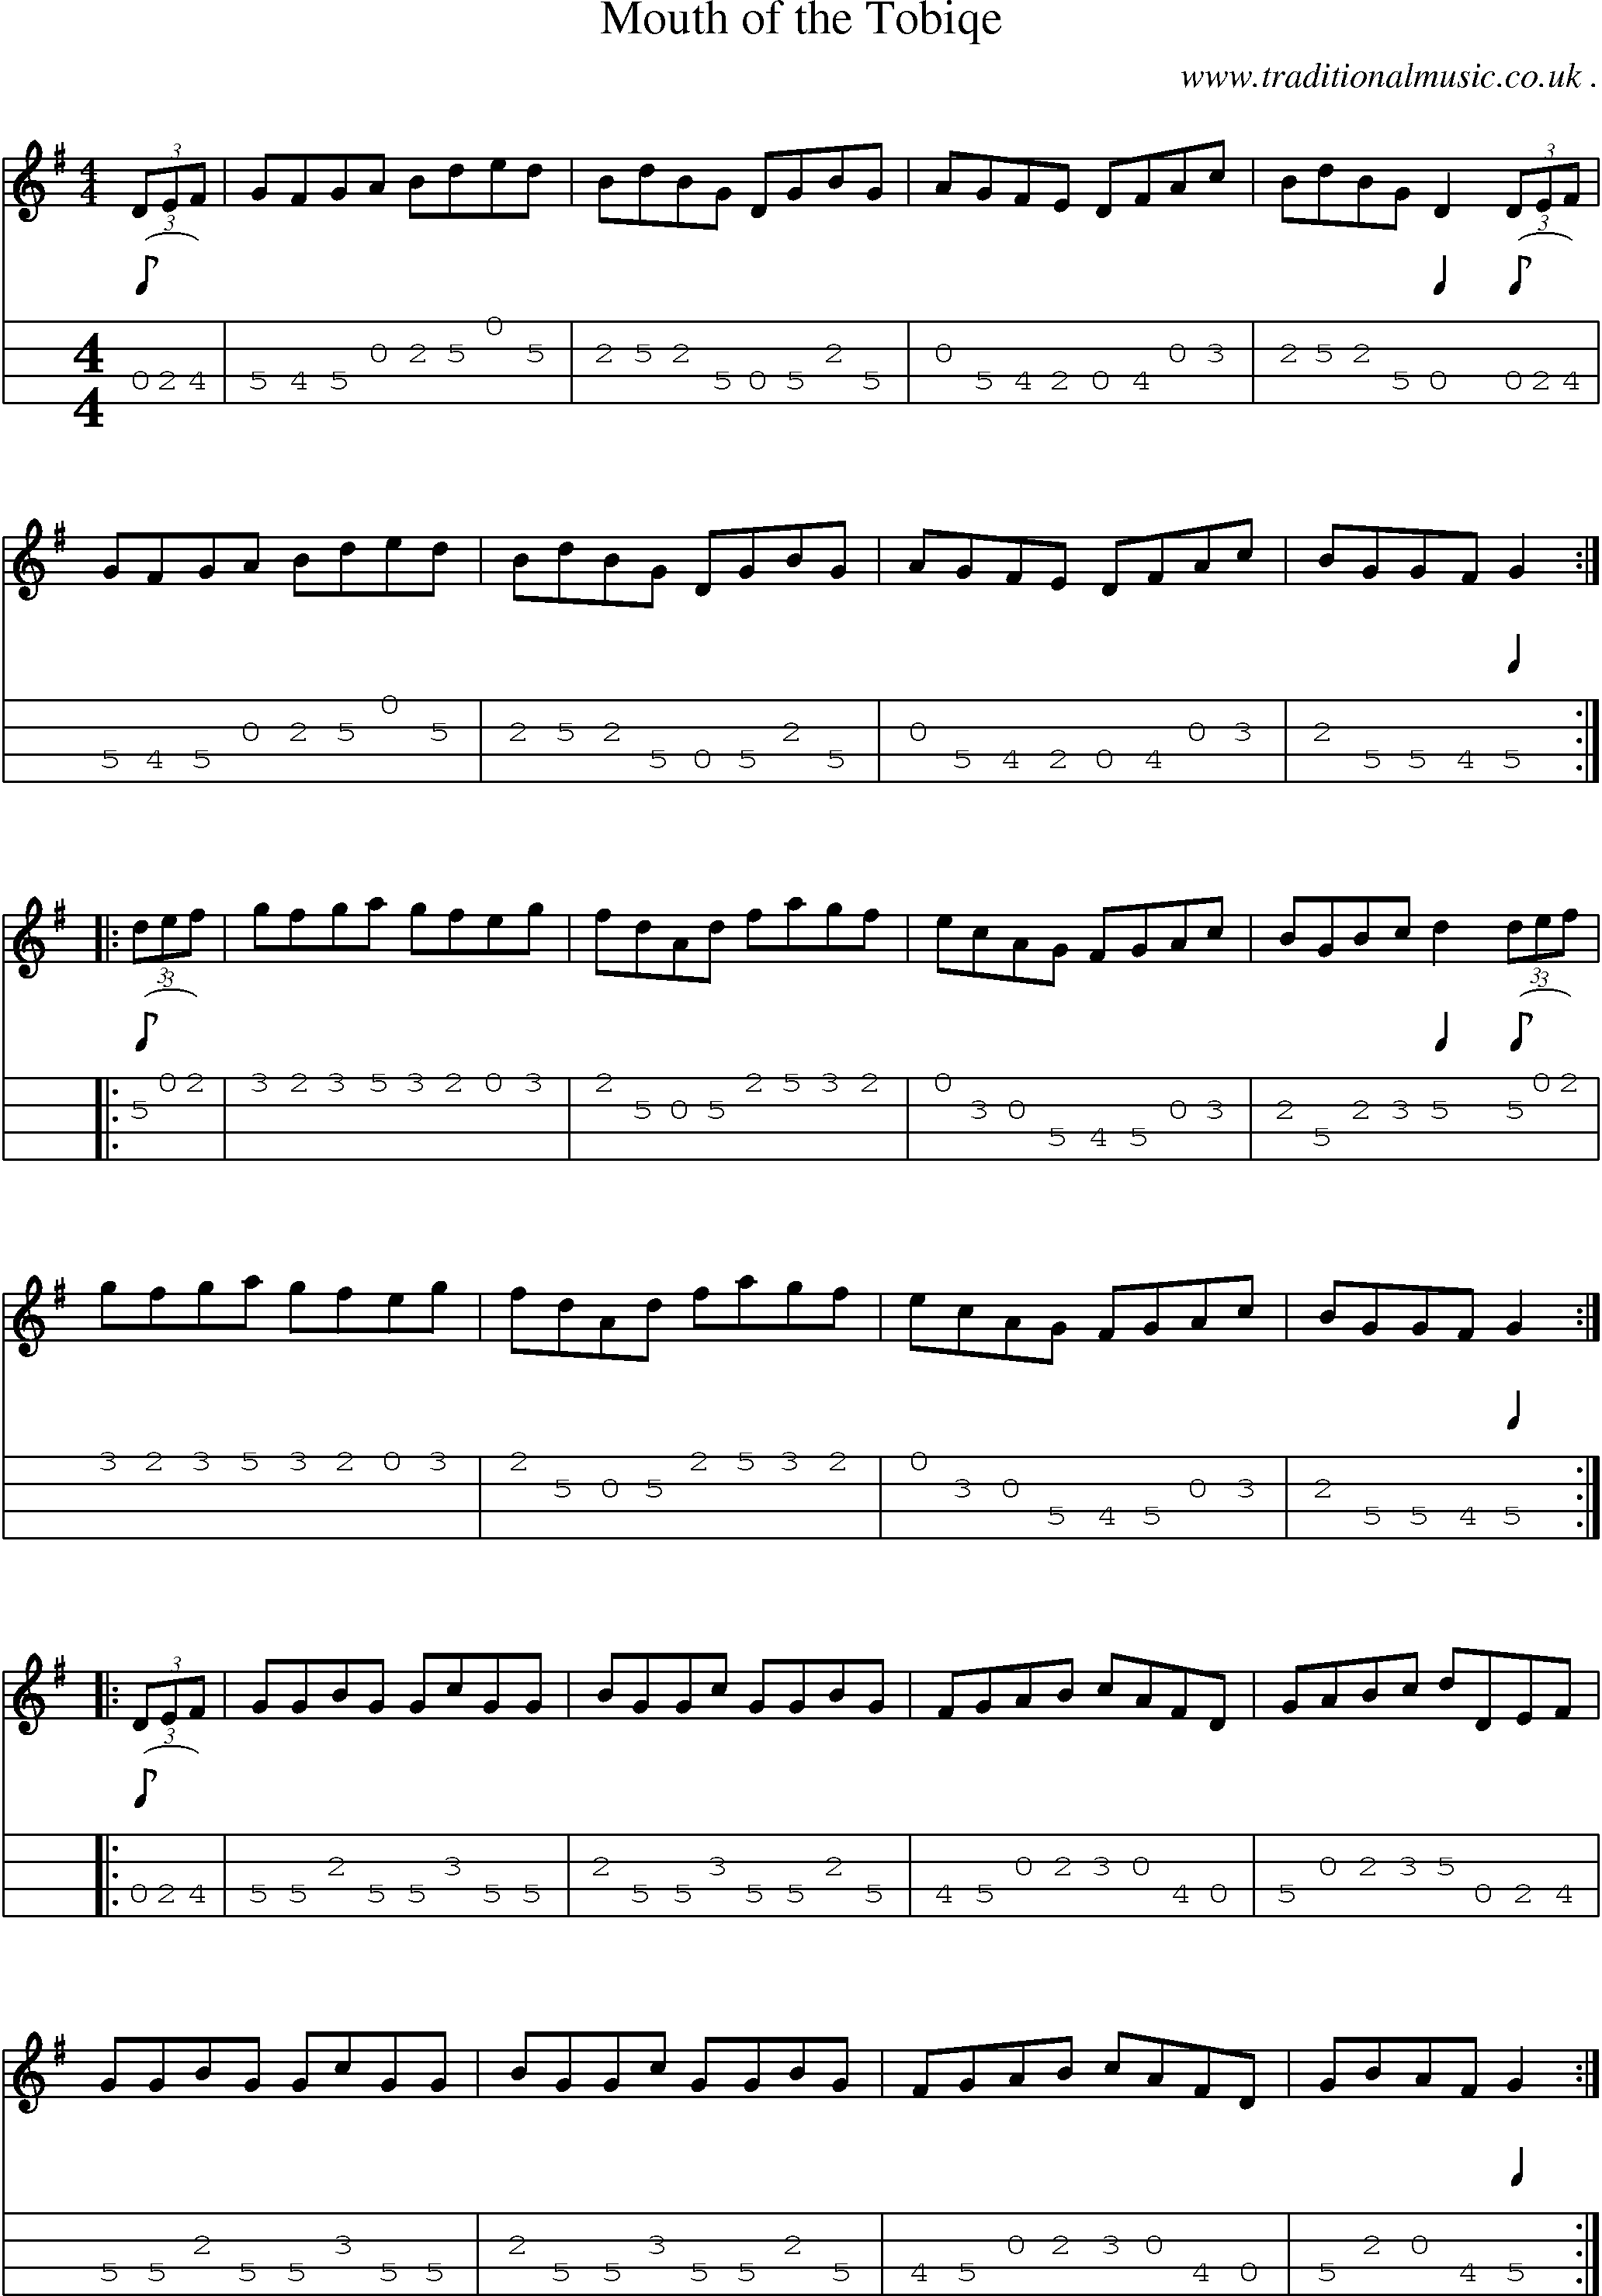 Sheet-Music and Mandolin Tabs for Mouth Of The Tobiqe